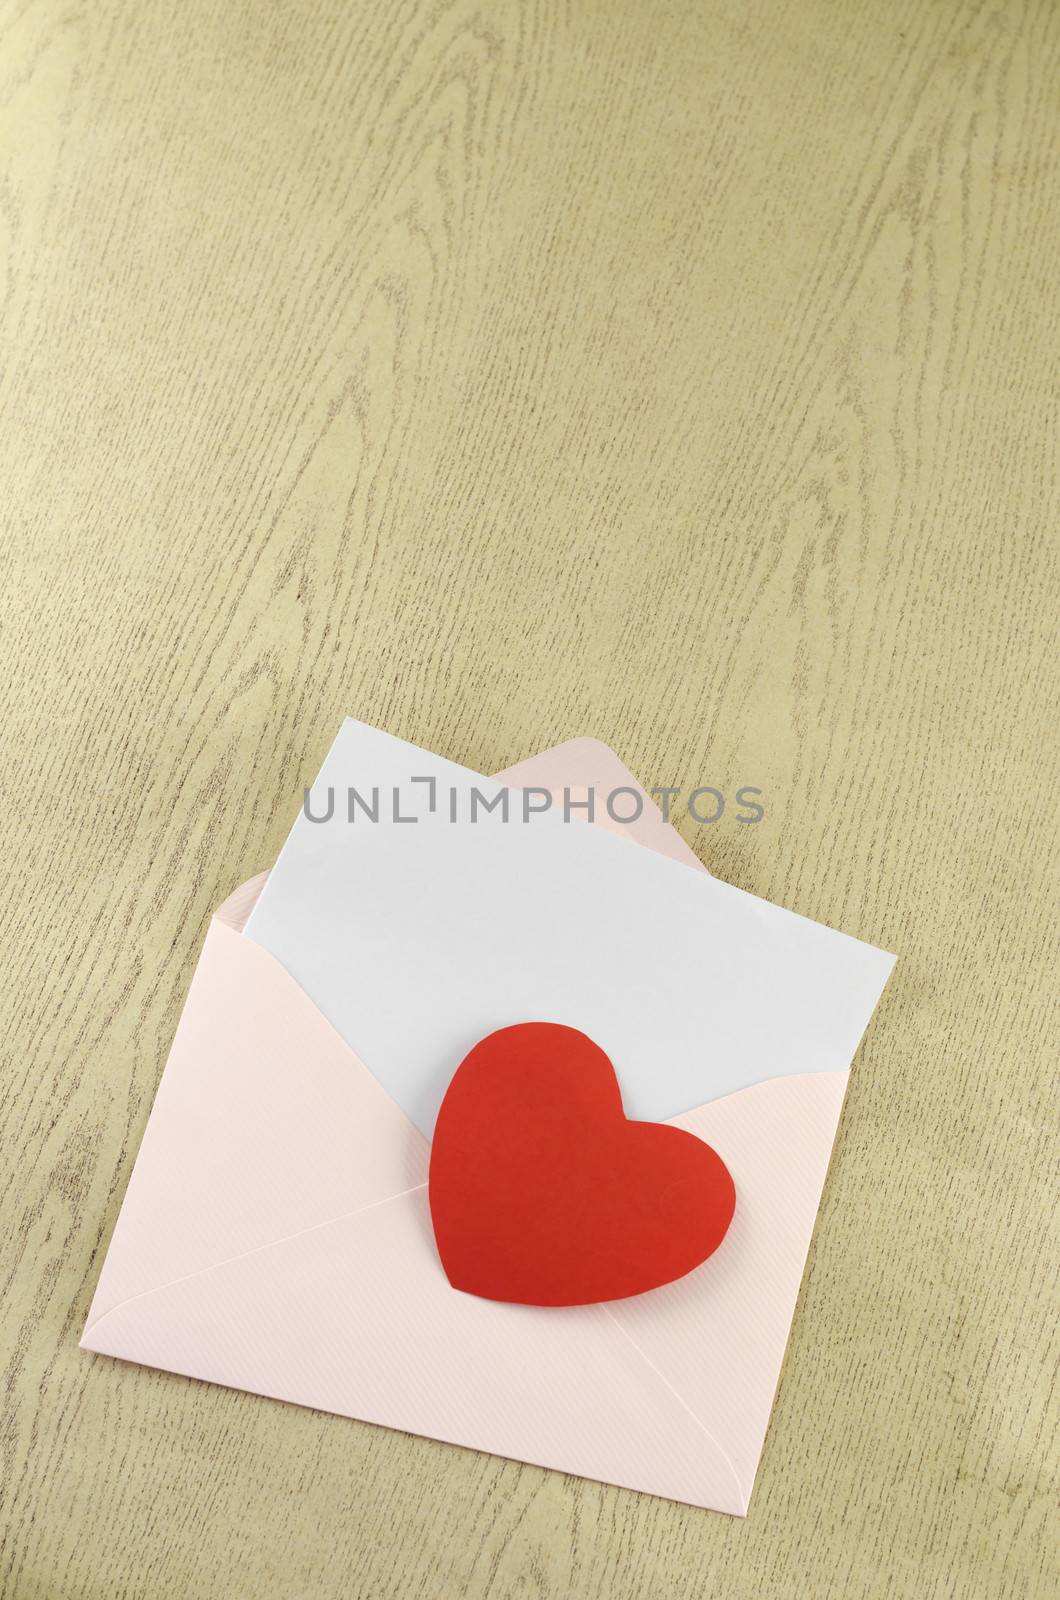 red heart with pink envelope on wooden background